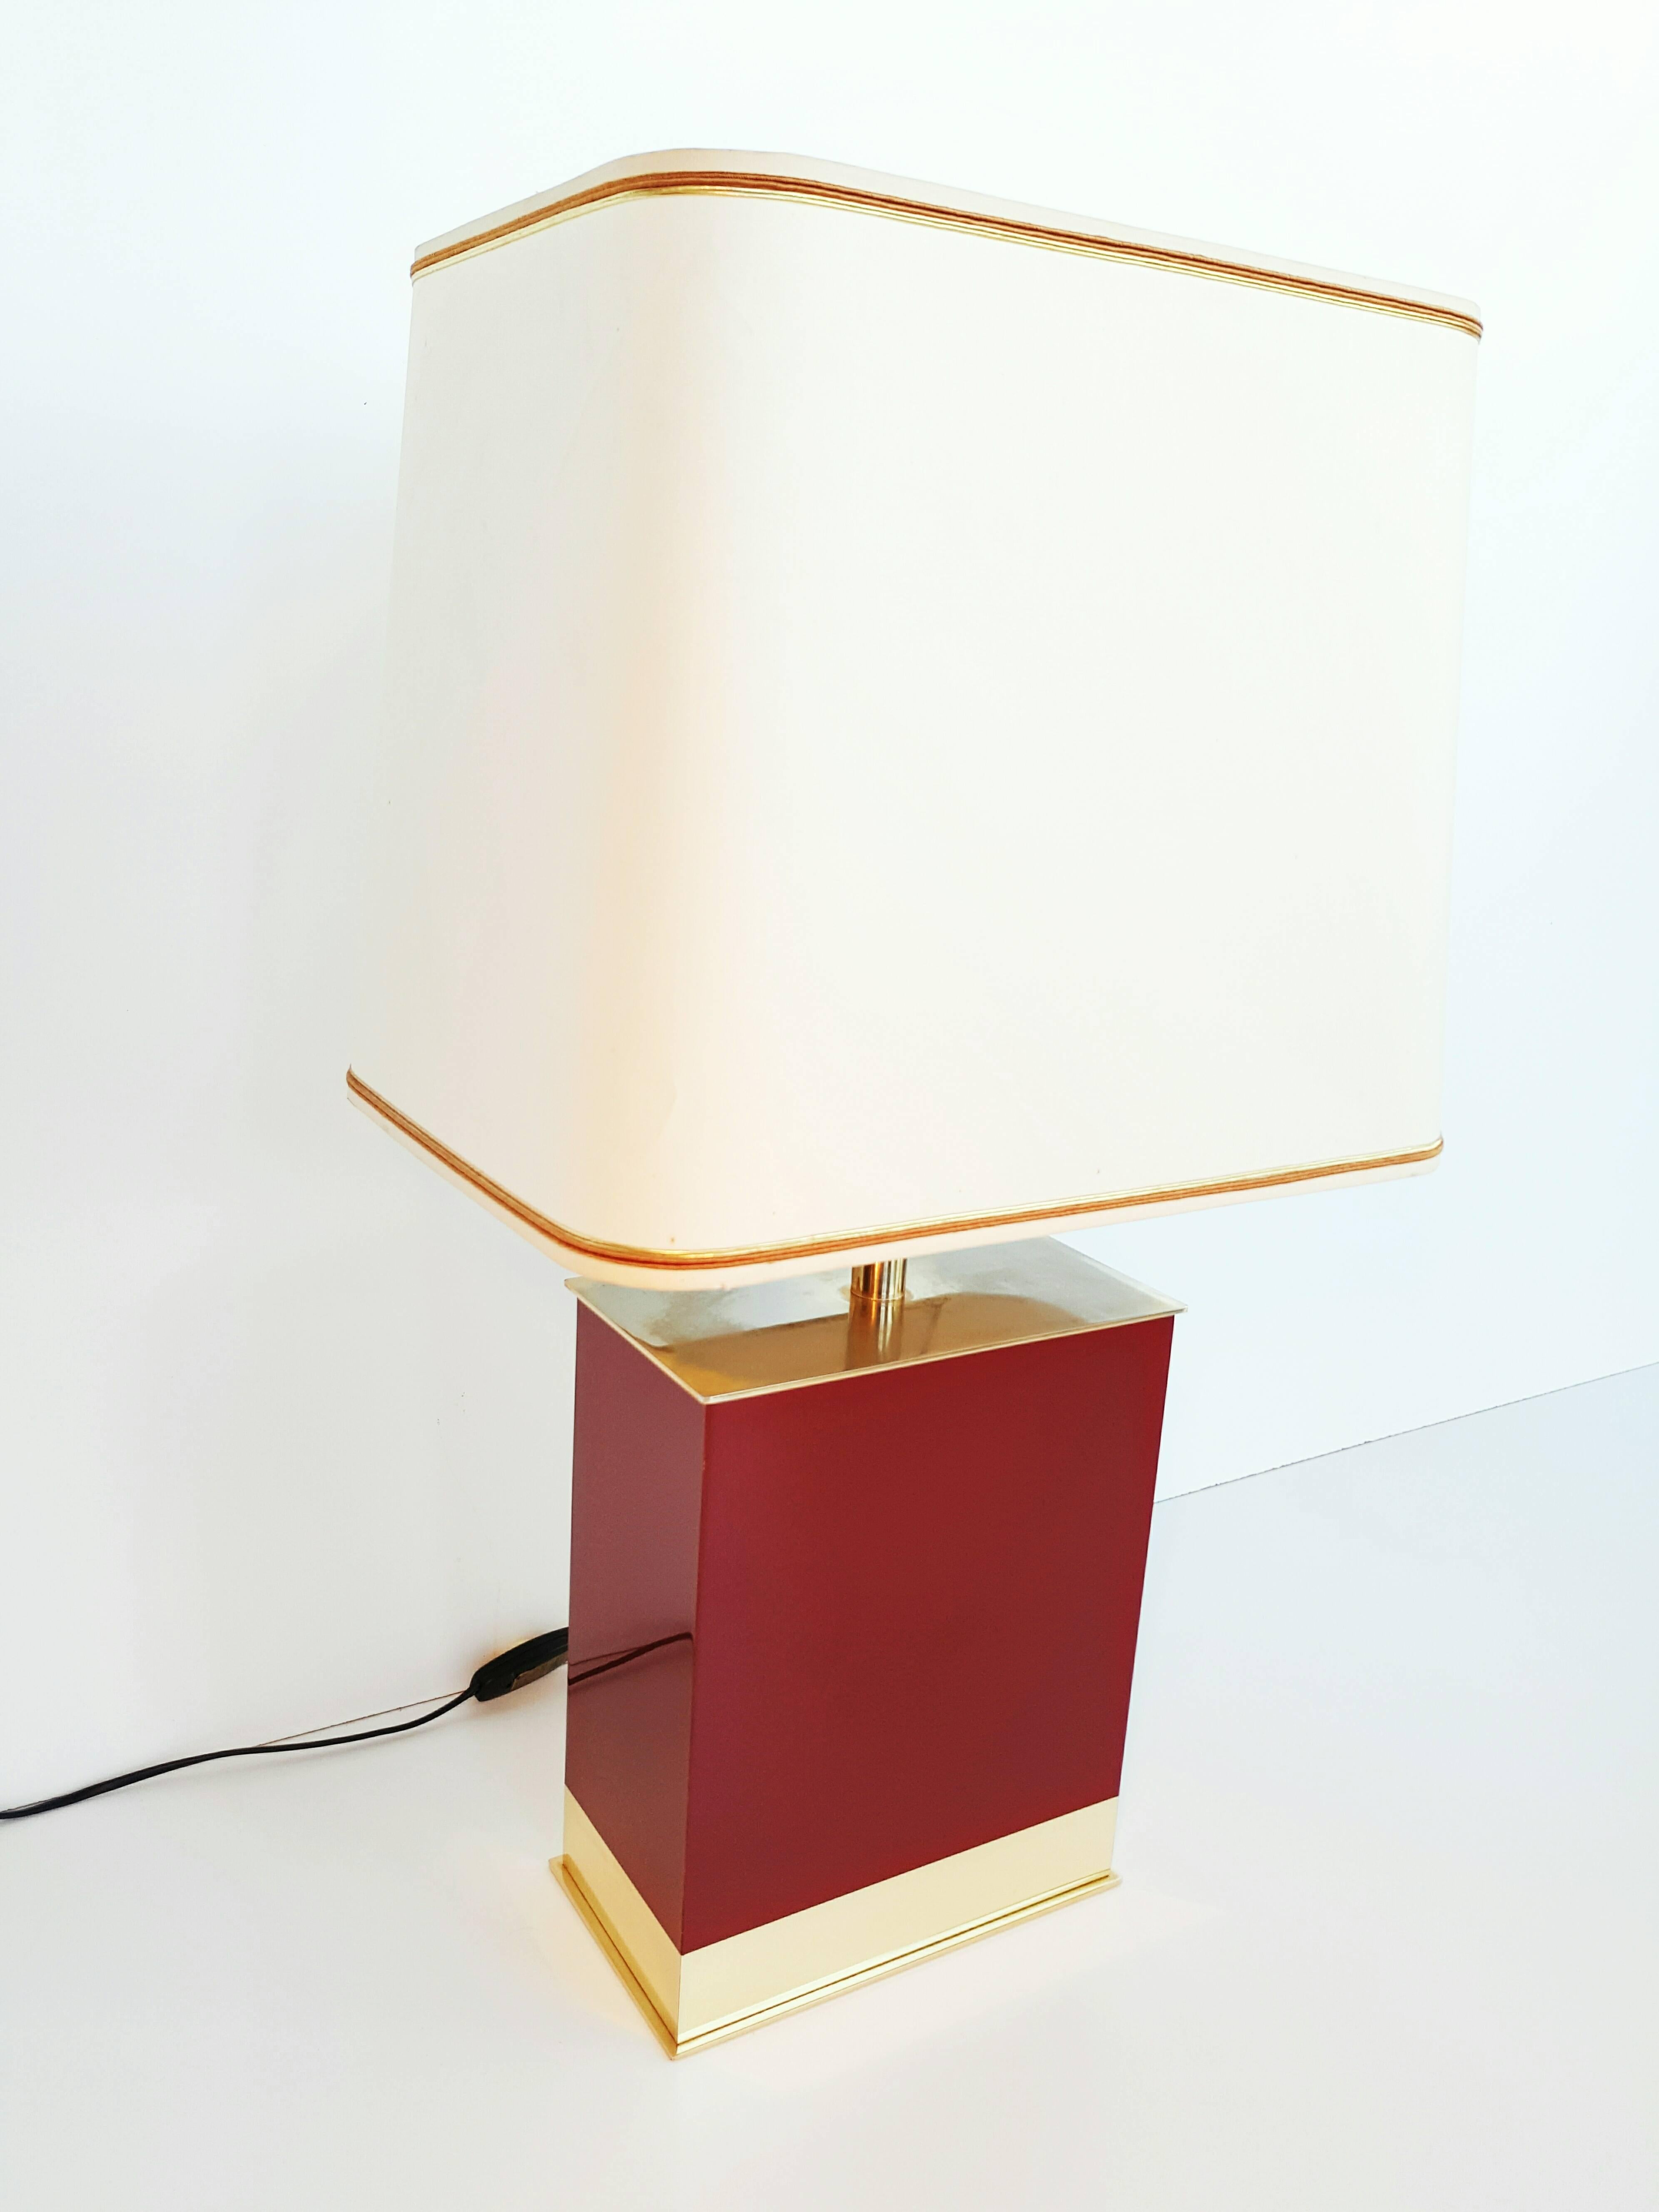 French Largest Burgundy Lacquered and Brass Table Lamp by Maison Jansen, 1970s